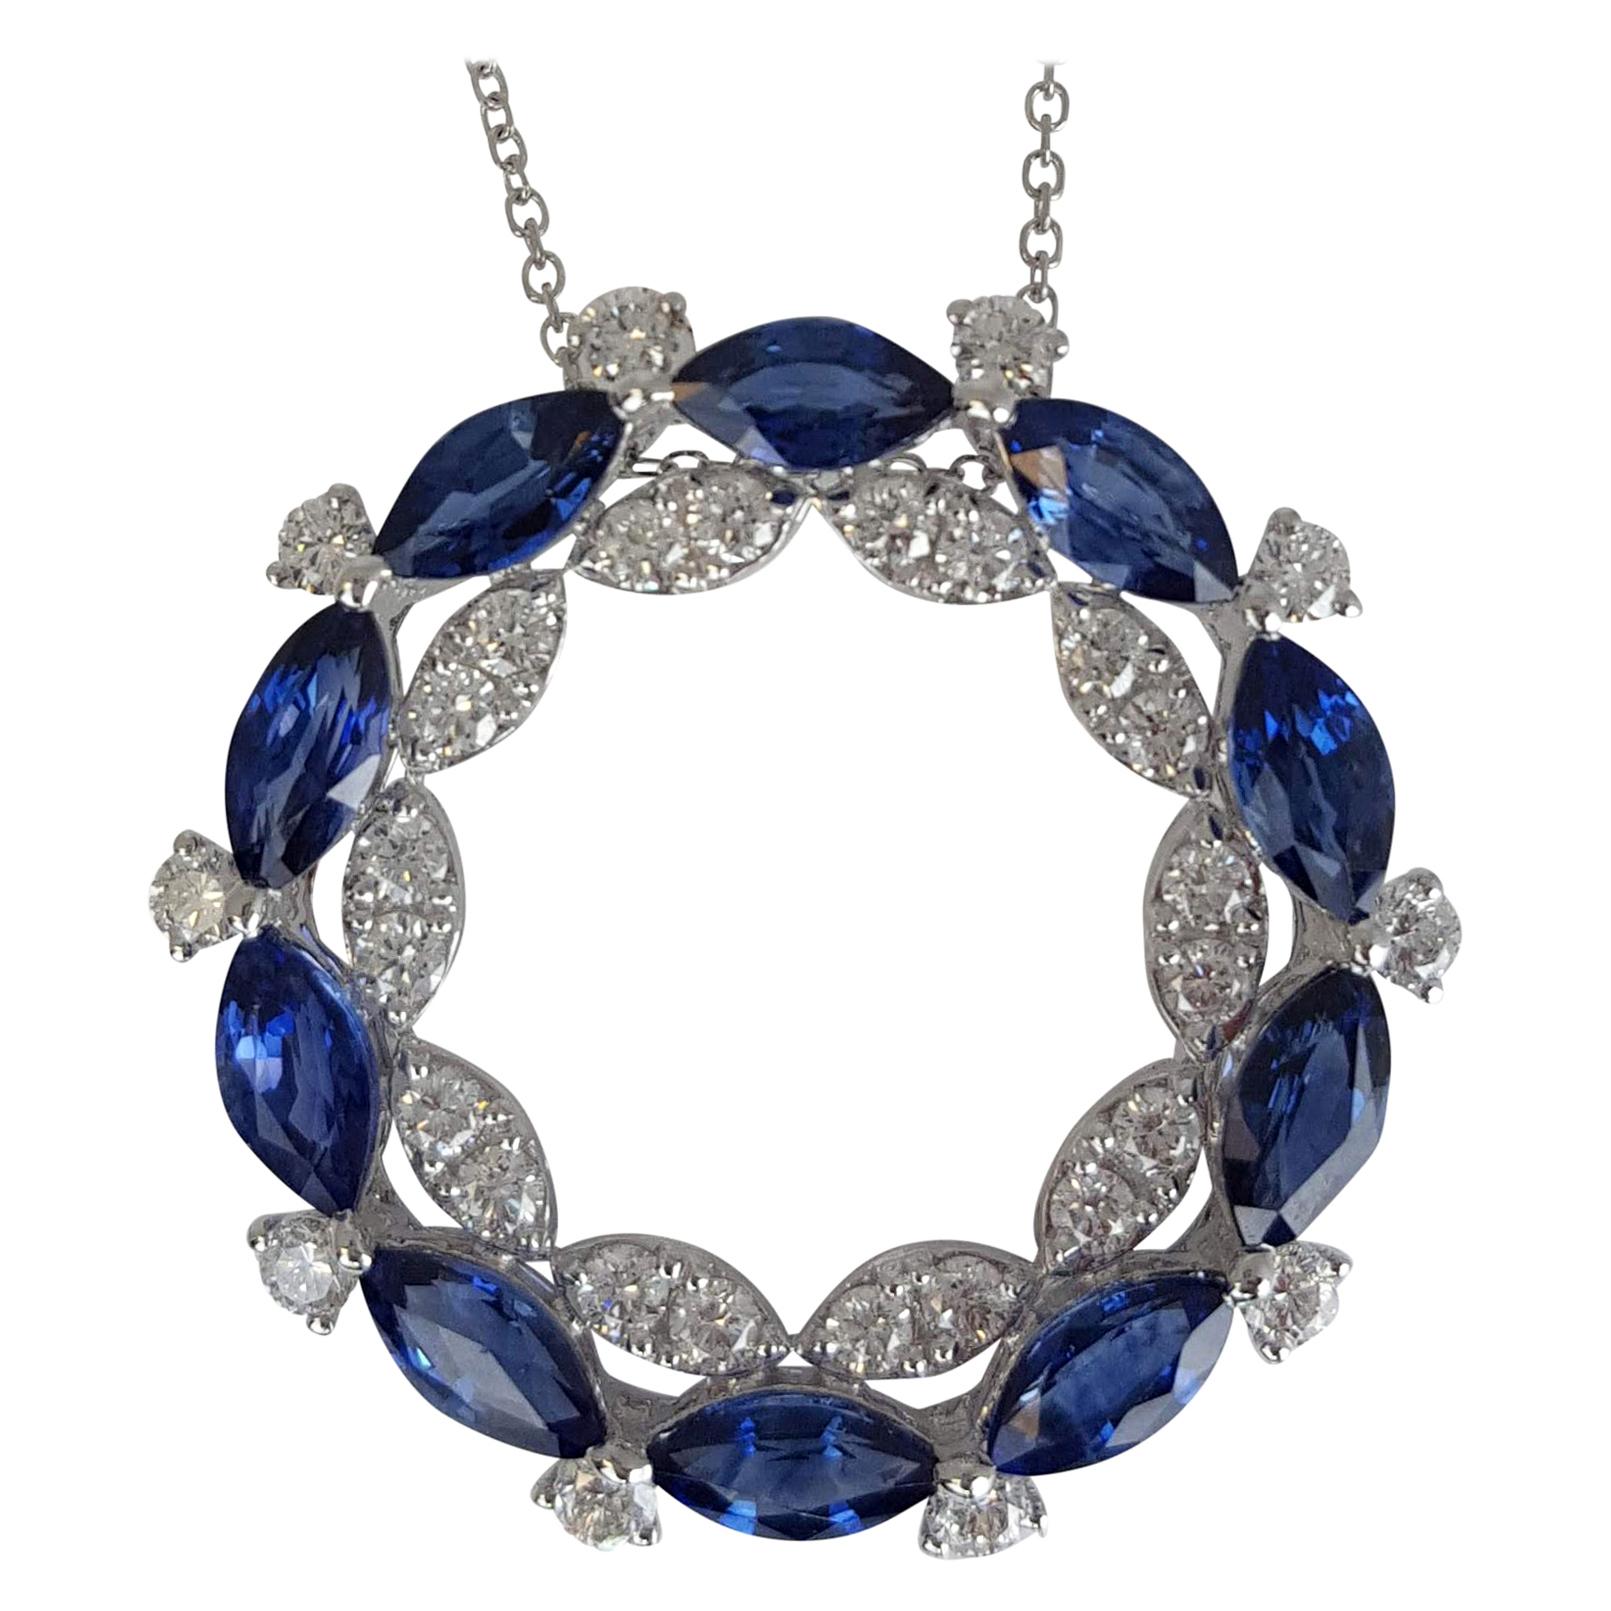 This sapphire pendant defines opulence with its breathtaking double halo design. This captivating piece is a true work of art, featuring a symphony of gemstones that will leave you in awe.

On the outer halo, you'll find a striking arrangement of 10